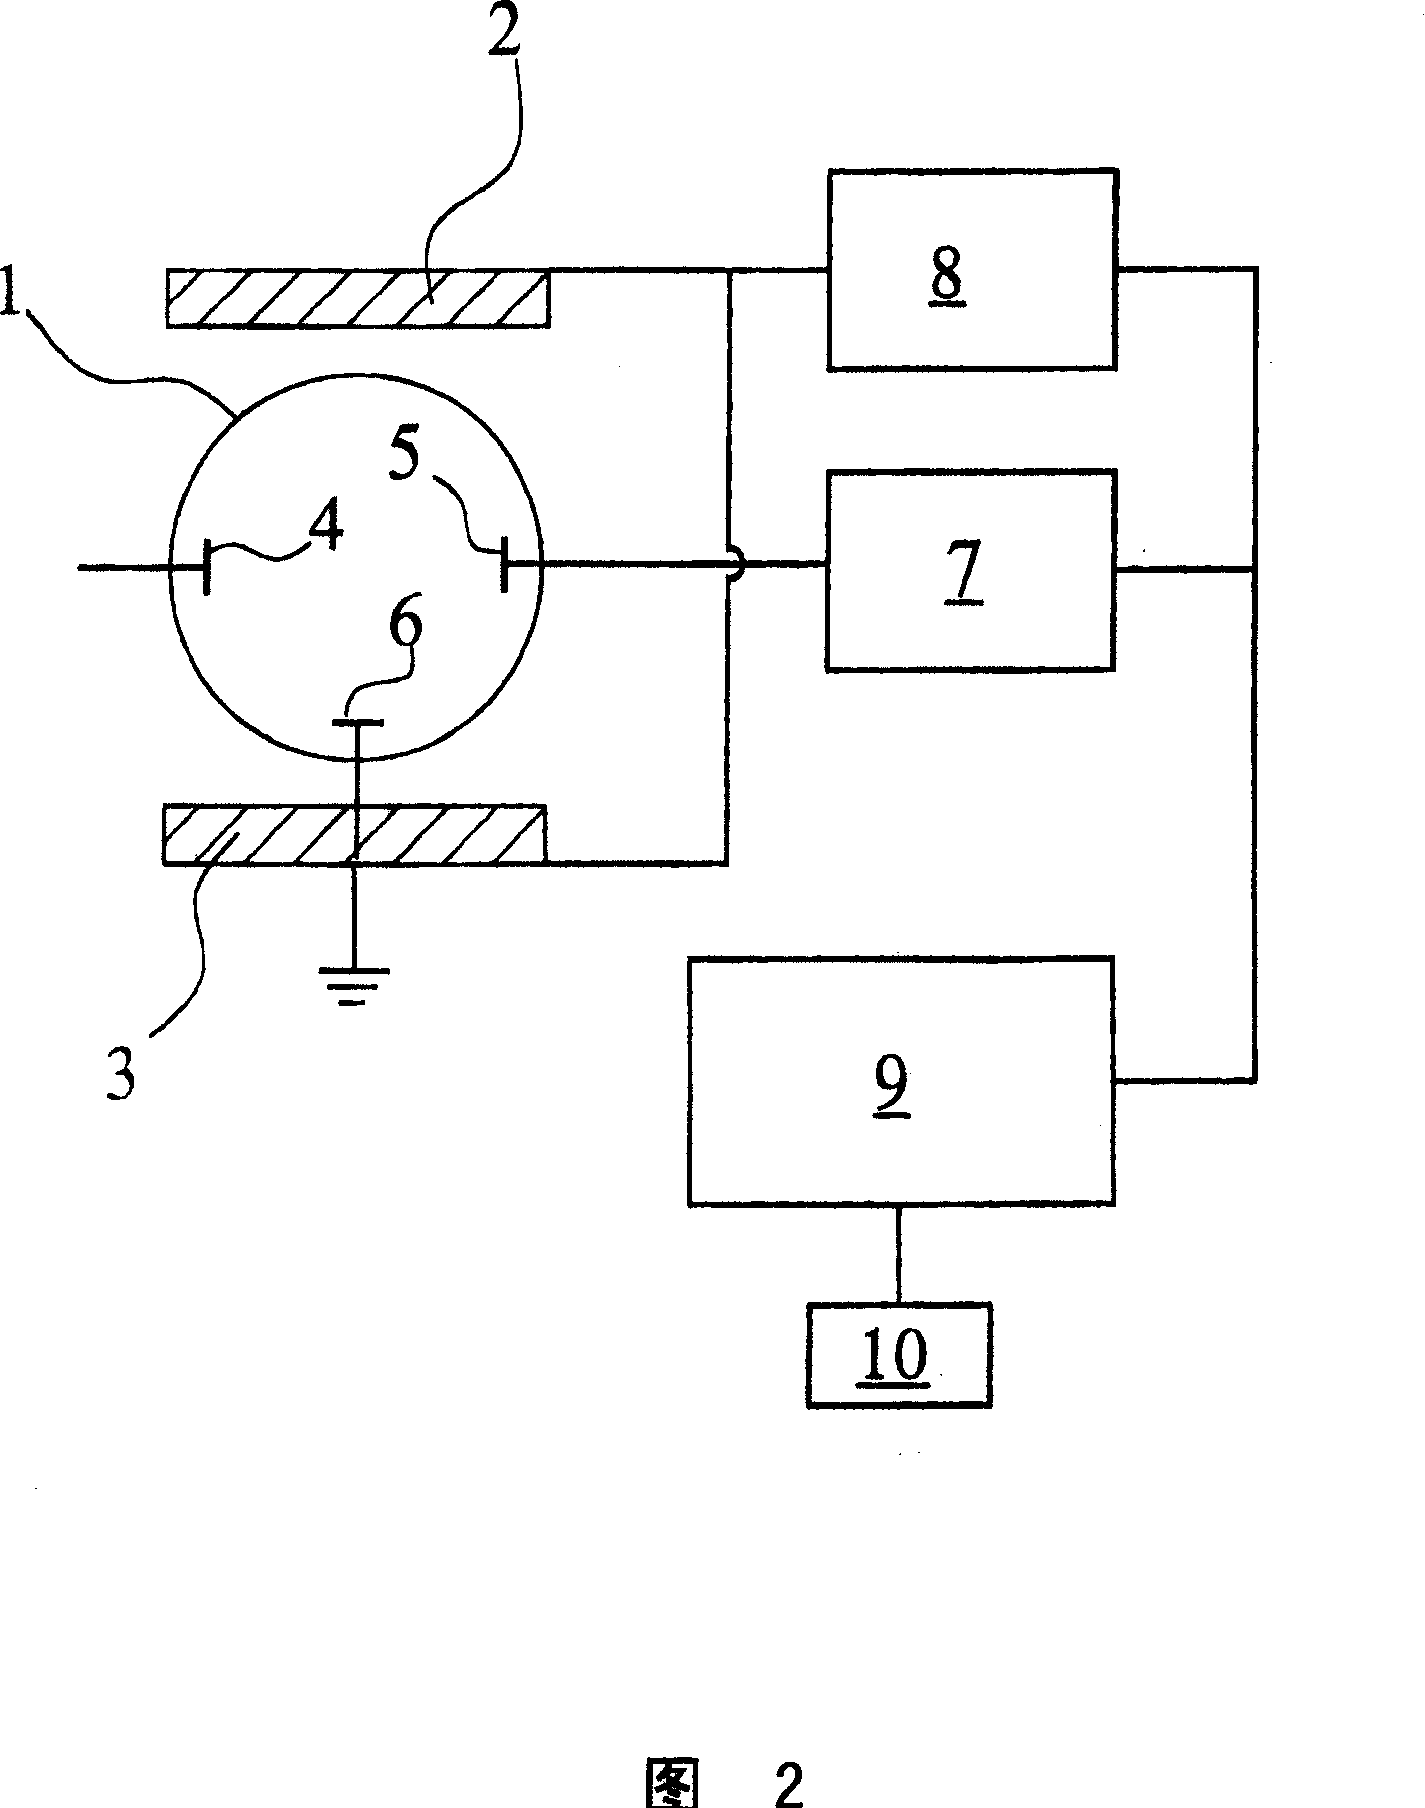 Method of operating a measuring apparatus